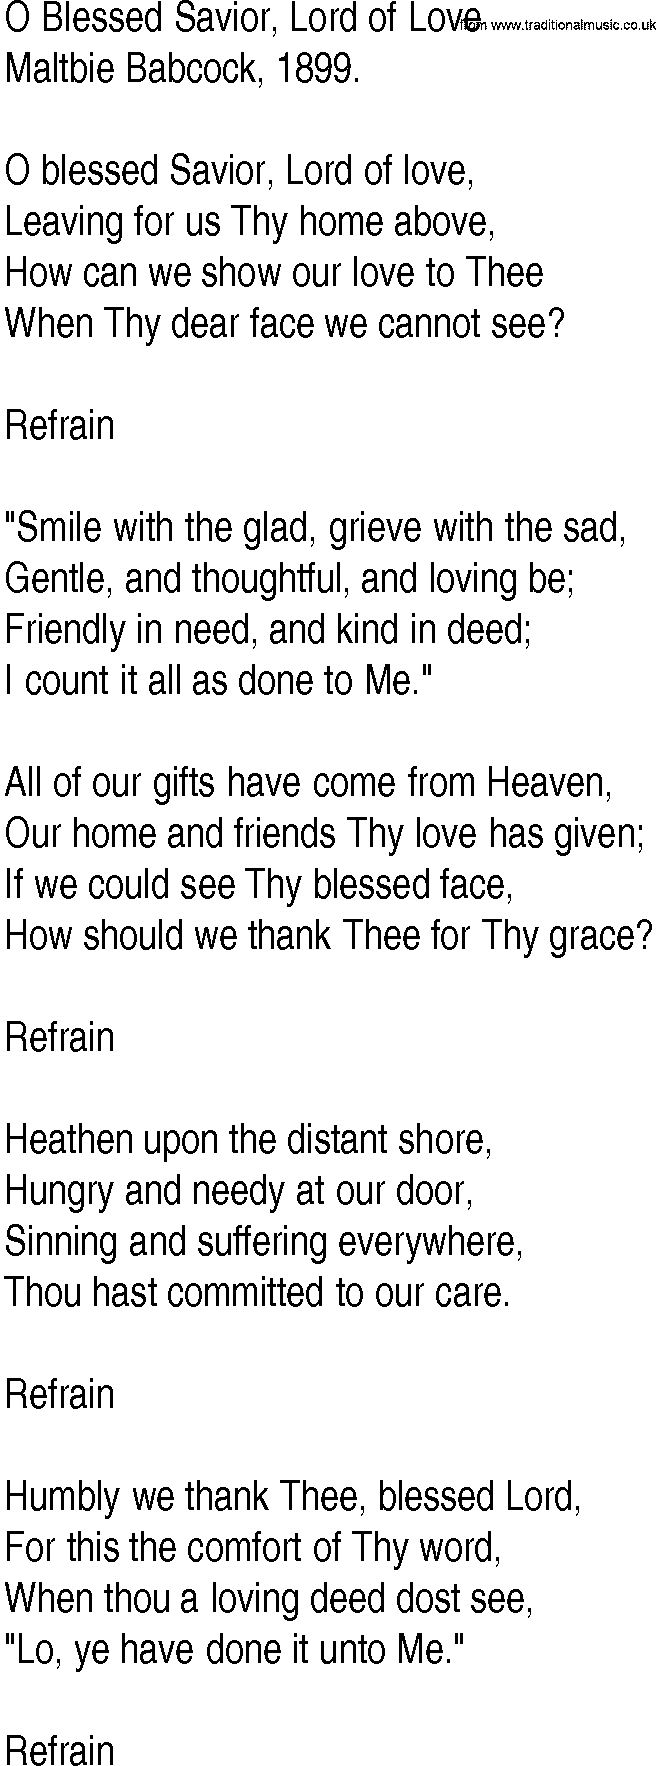 Hymn and Gospel Song: O Blessed Savior, Lord of Love by Maltbie Babcock lyrics